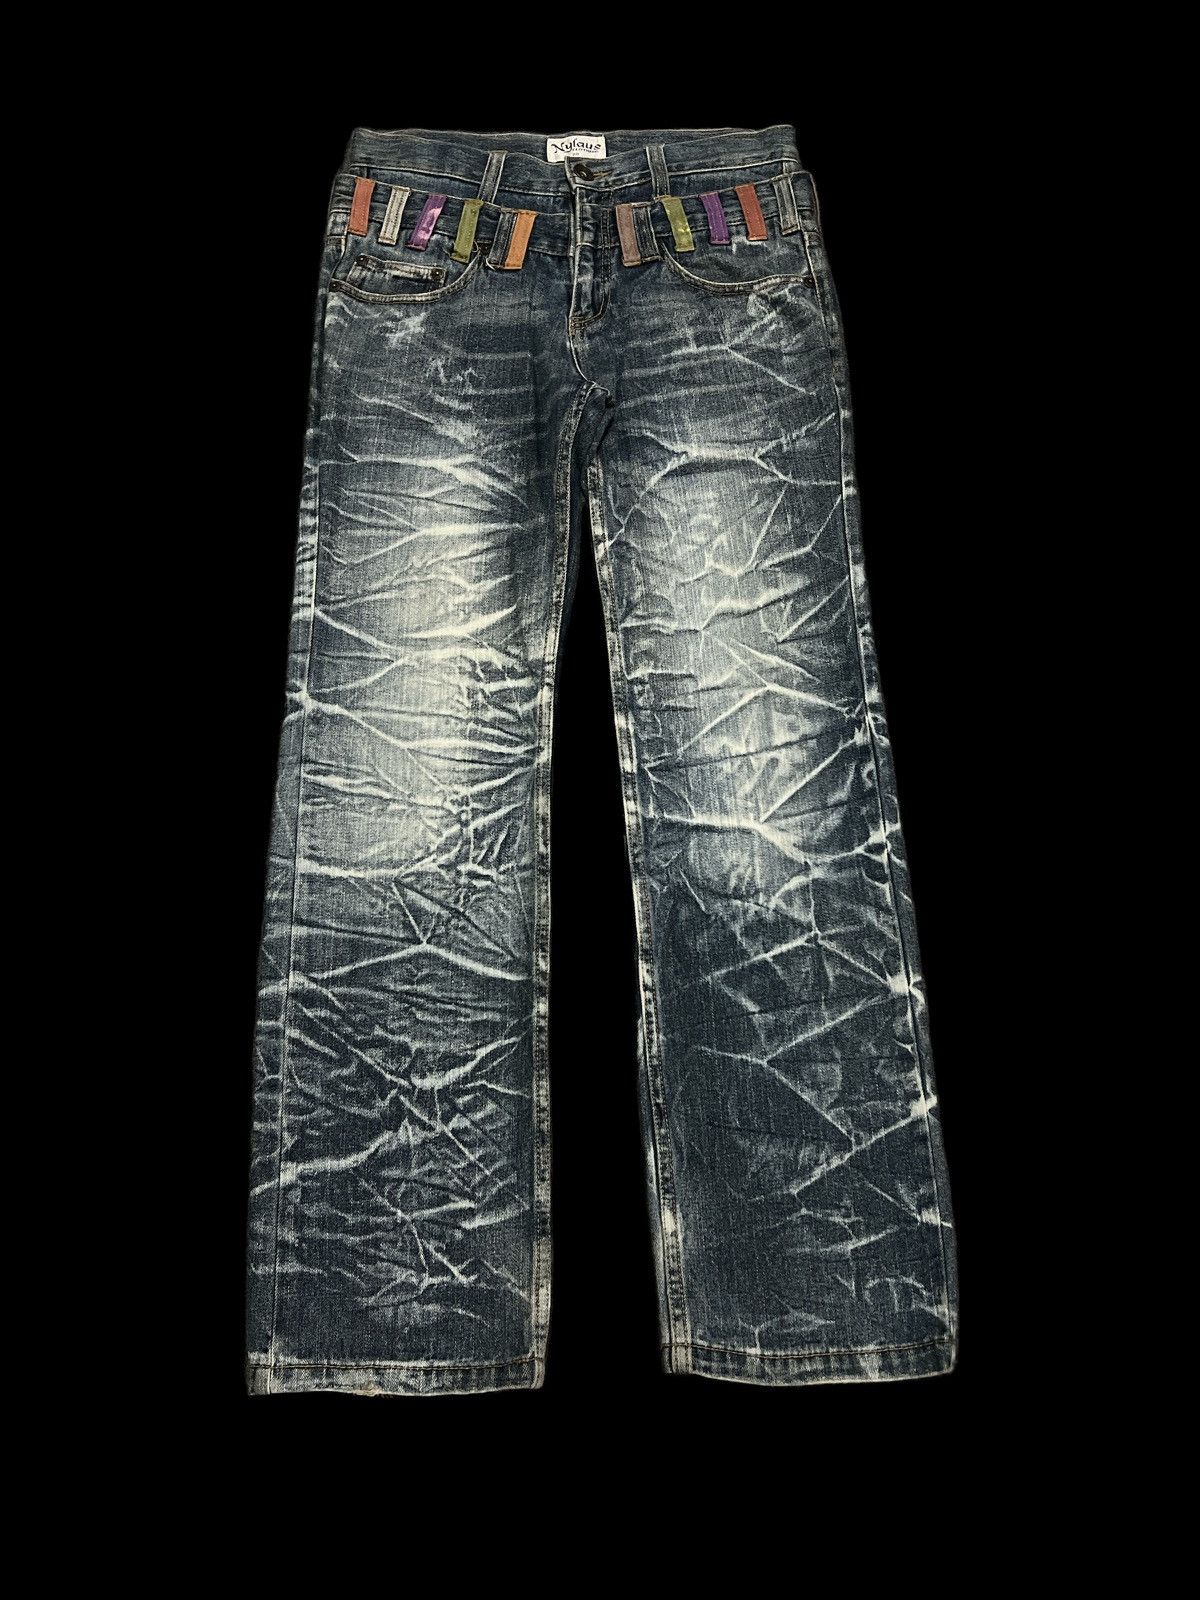 Pre-owned Avant Garde X Vintage Sicklimited Editiondouble Waist Distressed Denim By Nylaus In Blue